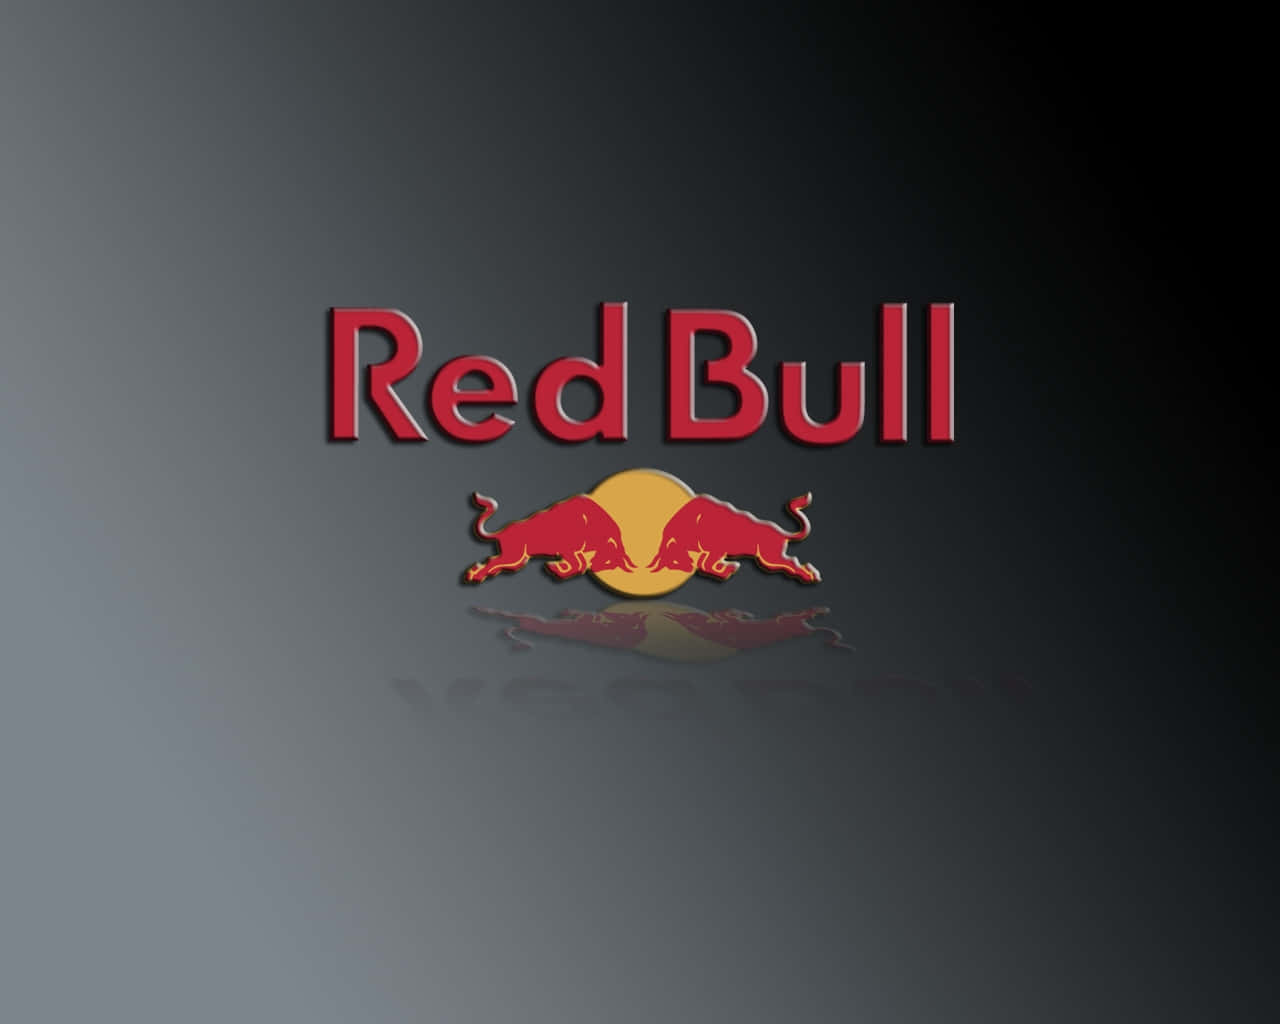 Get the wings with Red Bull!